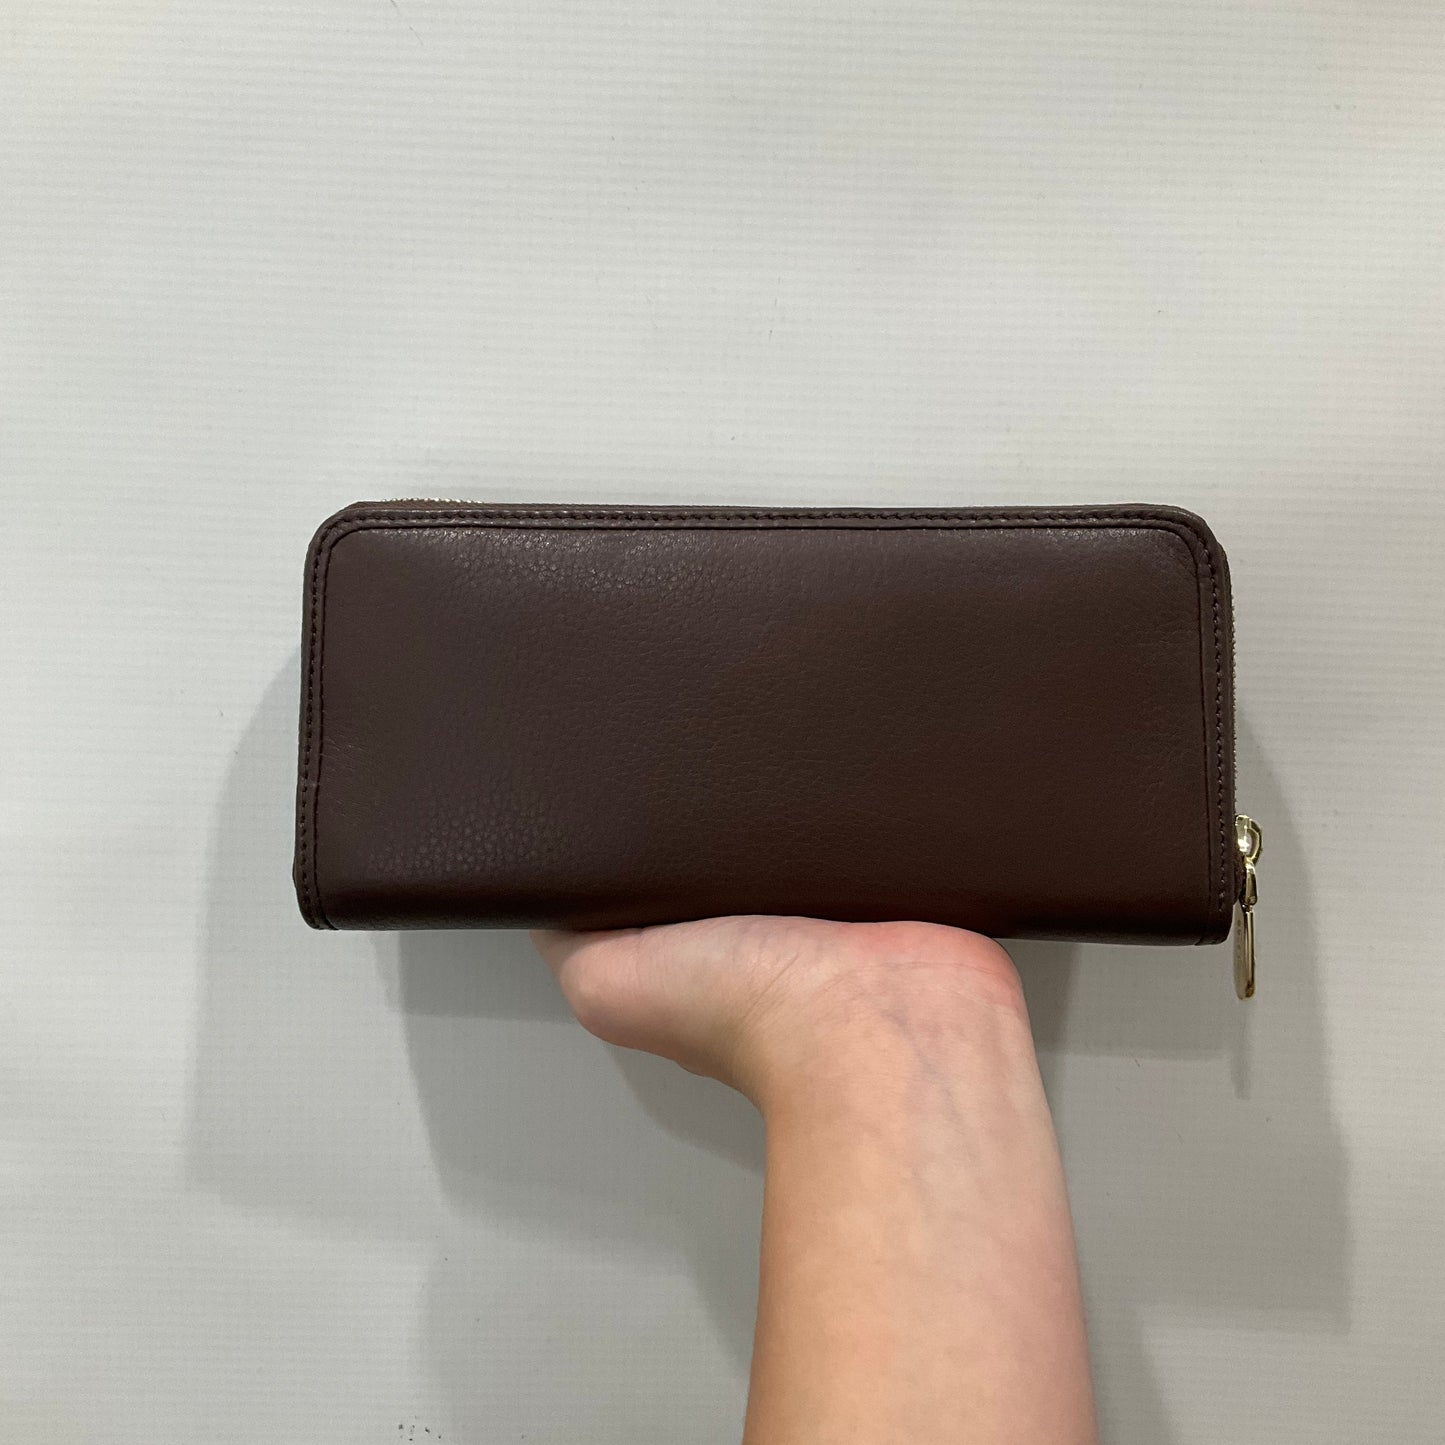 Wallet Leather Cole-haan, Size Medium